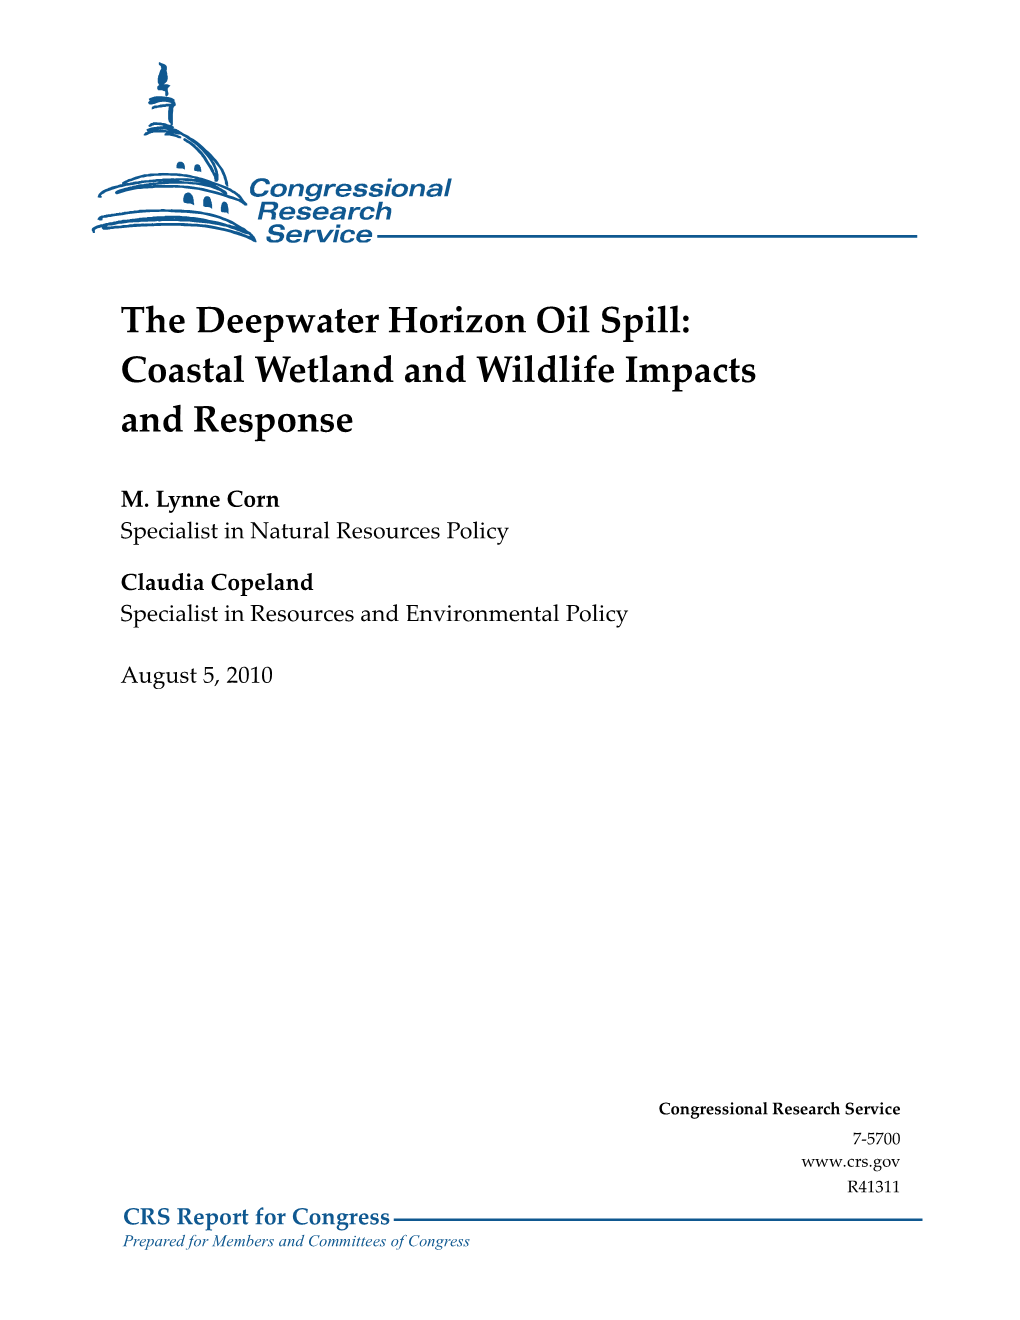 Deepwater Horizon Oil Spill: Coastal Wetland and Wildlife Impacts and Response